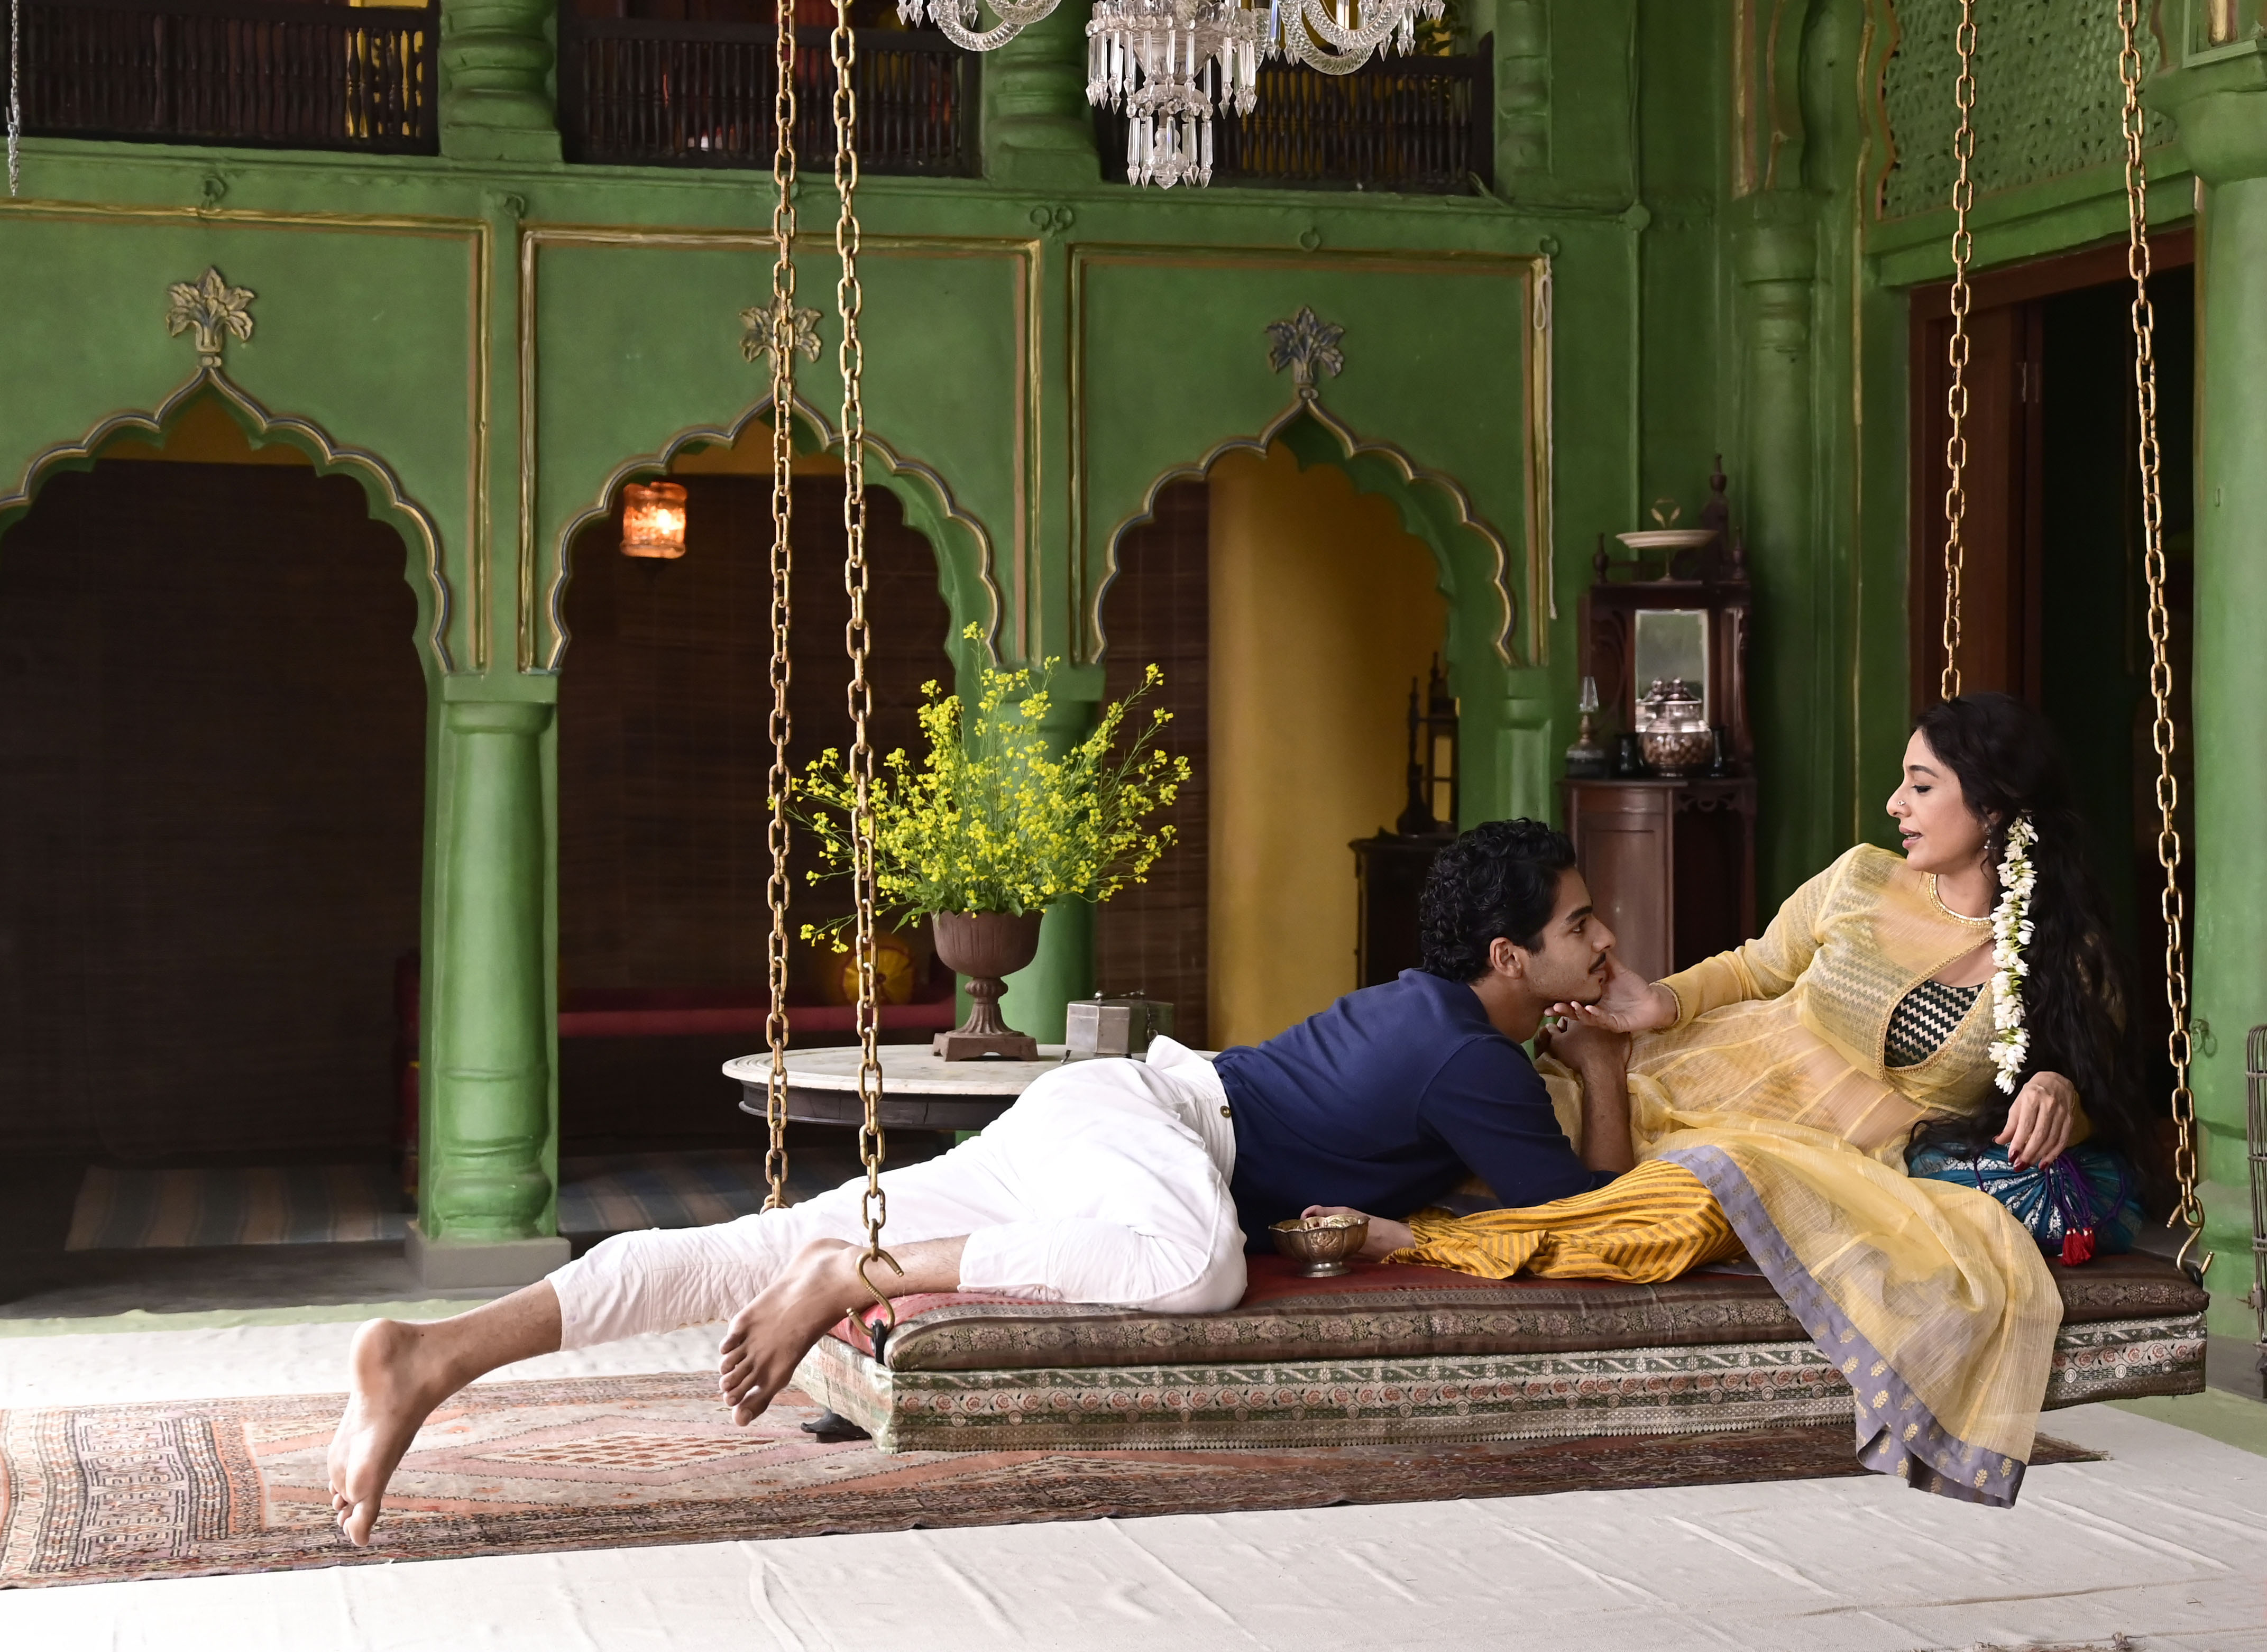 Ishaan Khatter and Tabu in 'A Suitable Boy' (Taha Ahmad/BBC/Lookout Point)